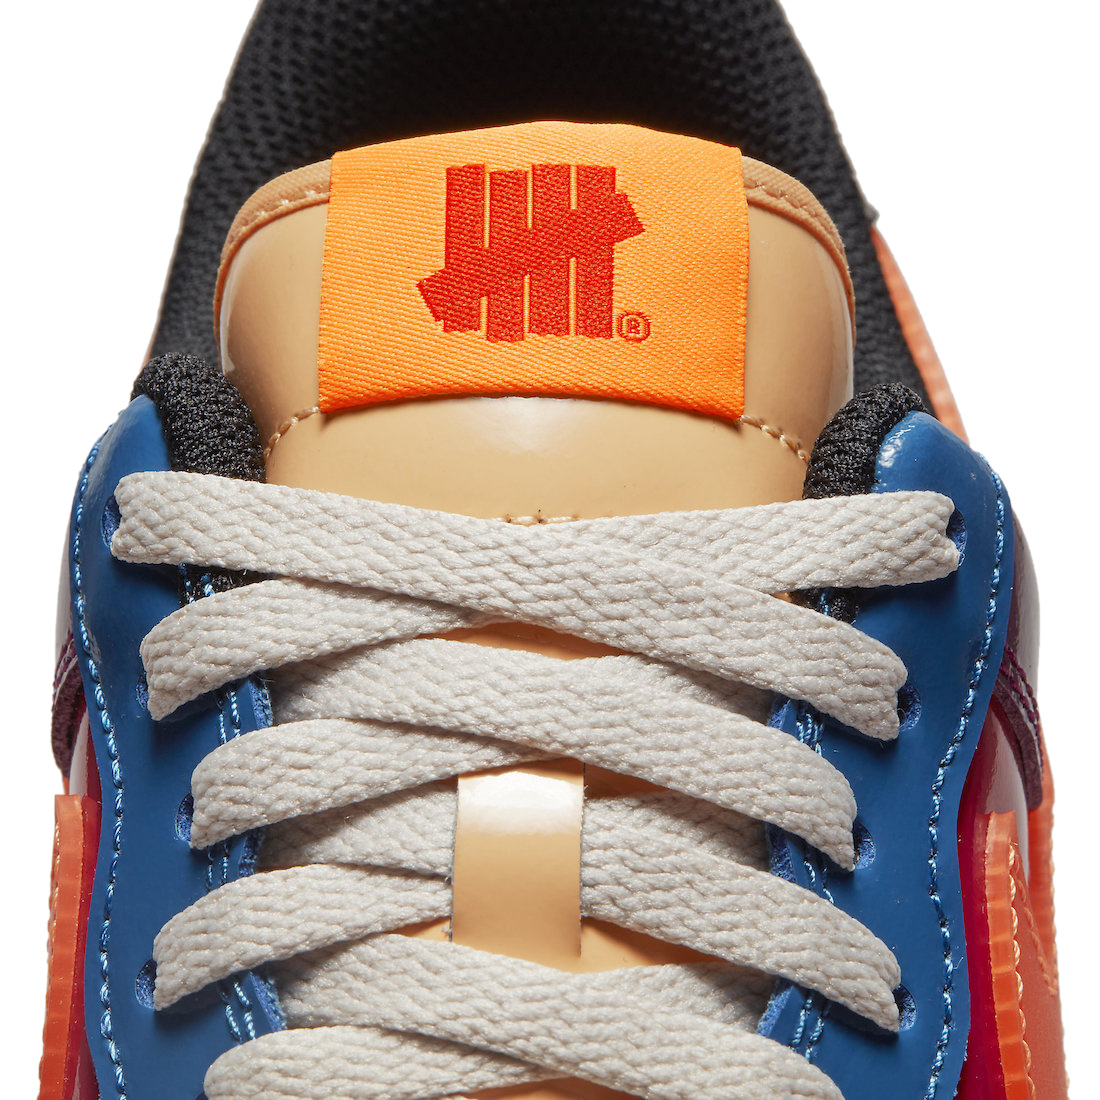 Undefeated x Nike Air Force 1 Low Multi-Color DV5255-400